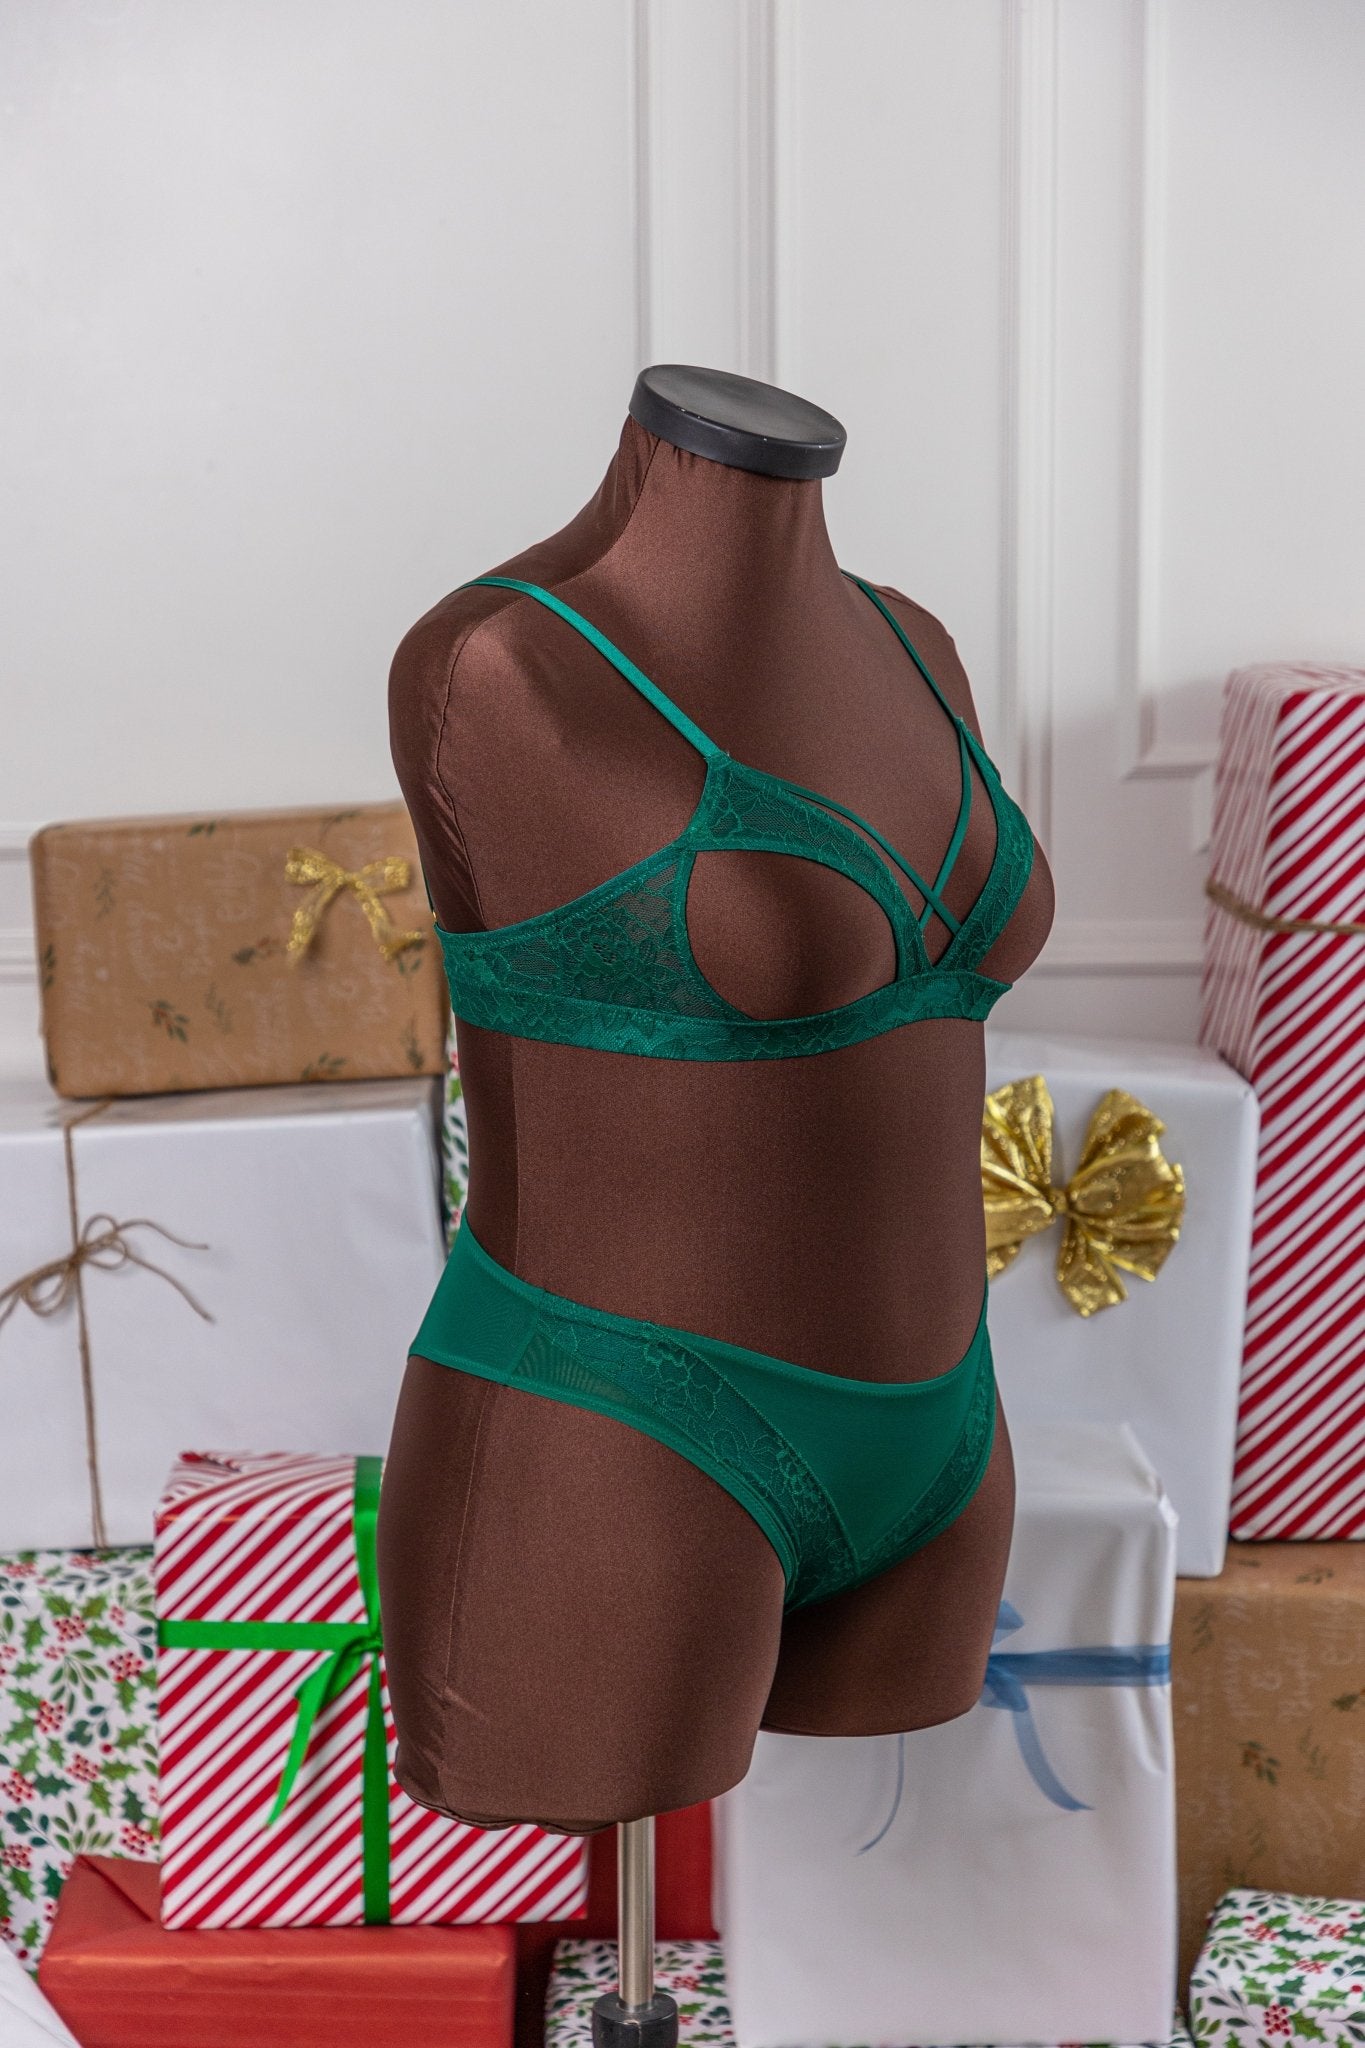 Lacy Crotchless Panty - Emerald - Mentionables